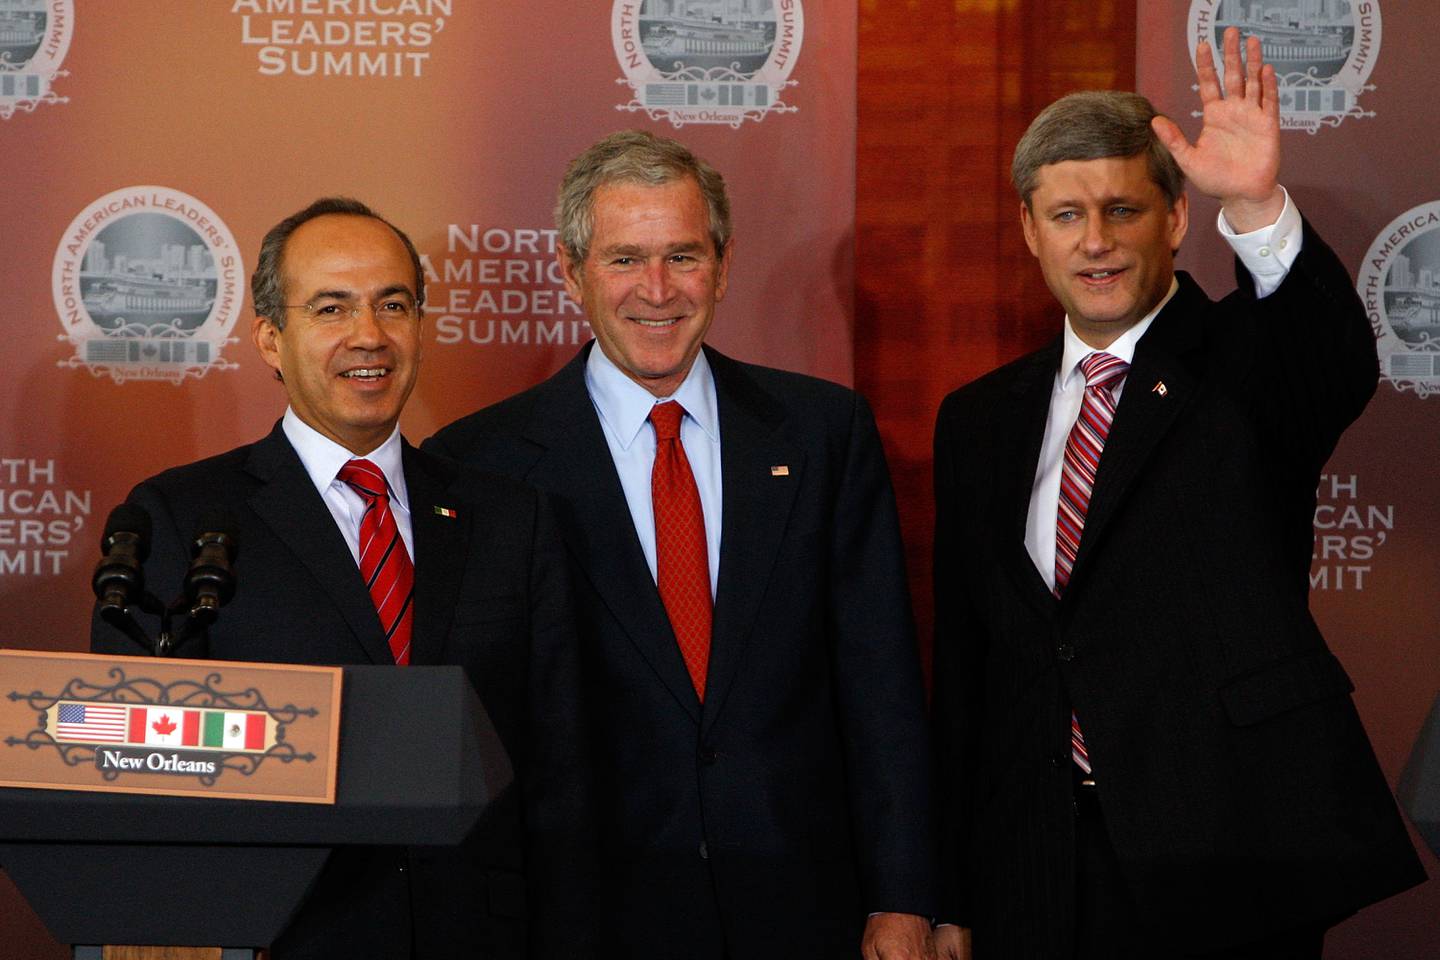 New Orleans - April 22: (L) President Of Mexico Felipe Calderon, President Of The United States George W. Bush And Prime Minister Of Canada Stephen Harper During A Press Conference During The North American Leaders' Summit At Gallier Hall On April 22, 2008 Together After New Orleans, Louisiana.  The Three Met To Discuss Trade Agreements In North America And Around The World.  (Photo By Chris Grethen / Getty Images)